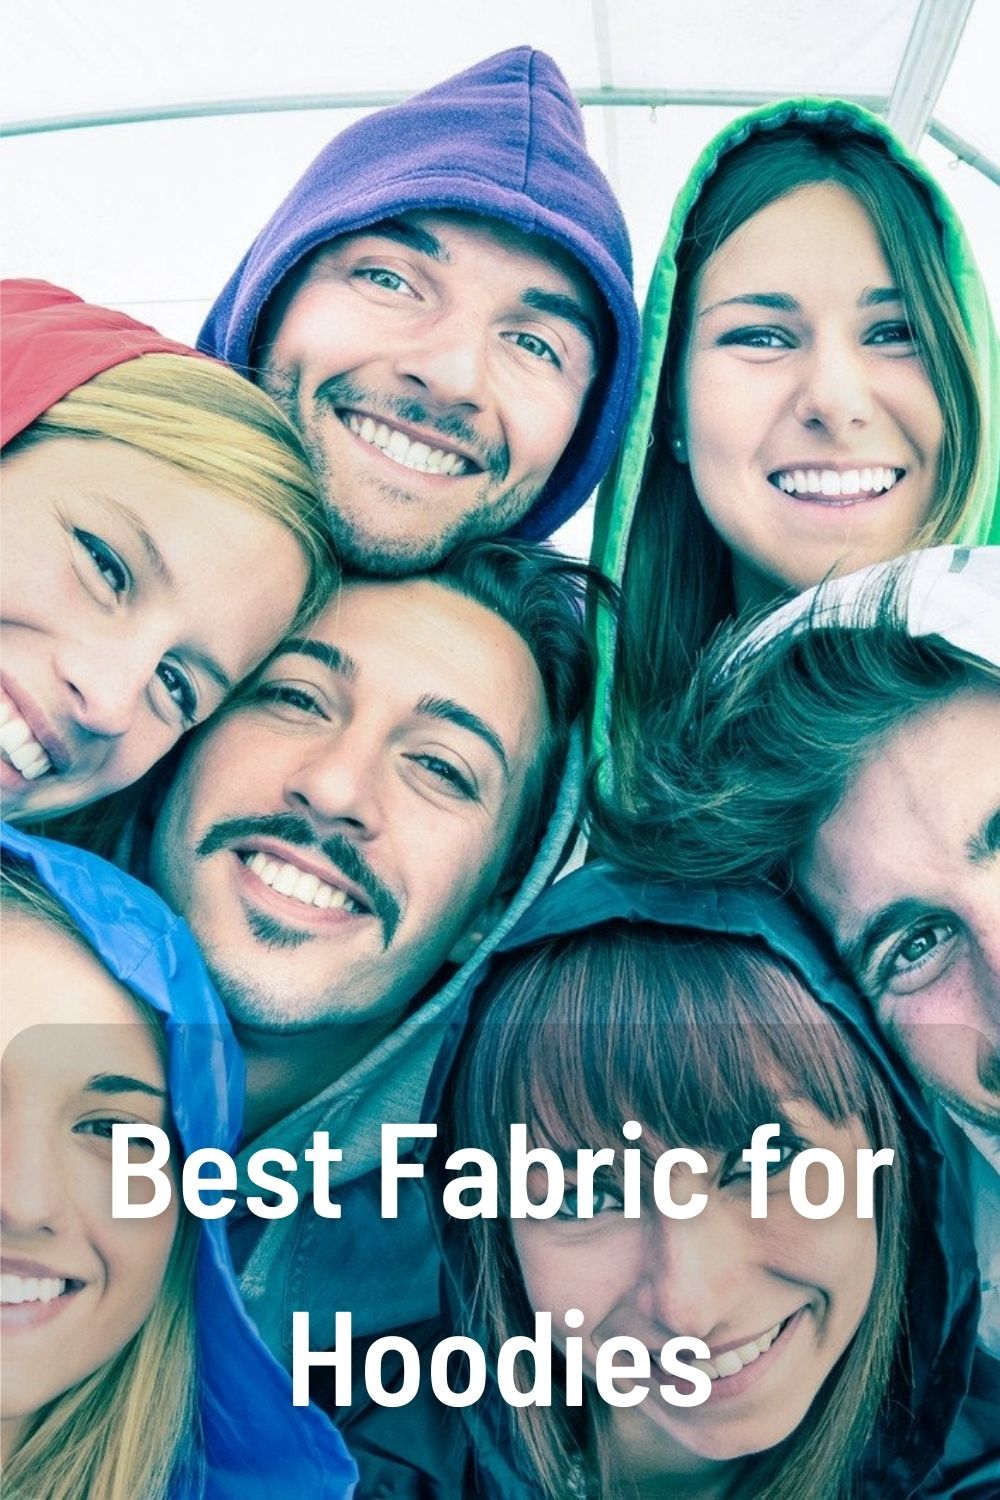 Best Fabric for Hoodies